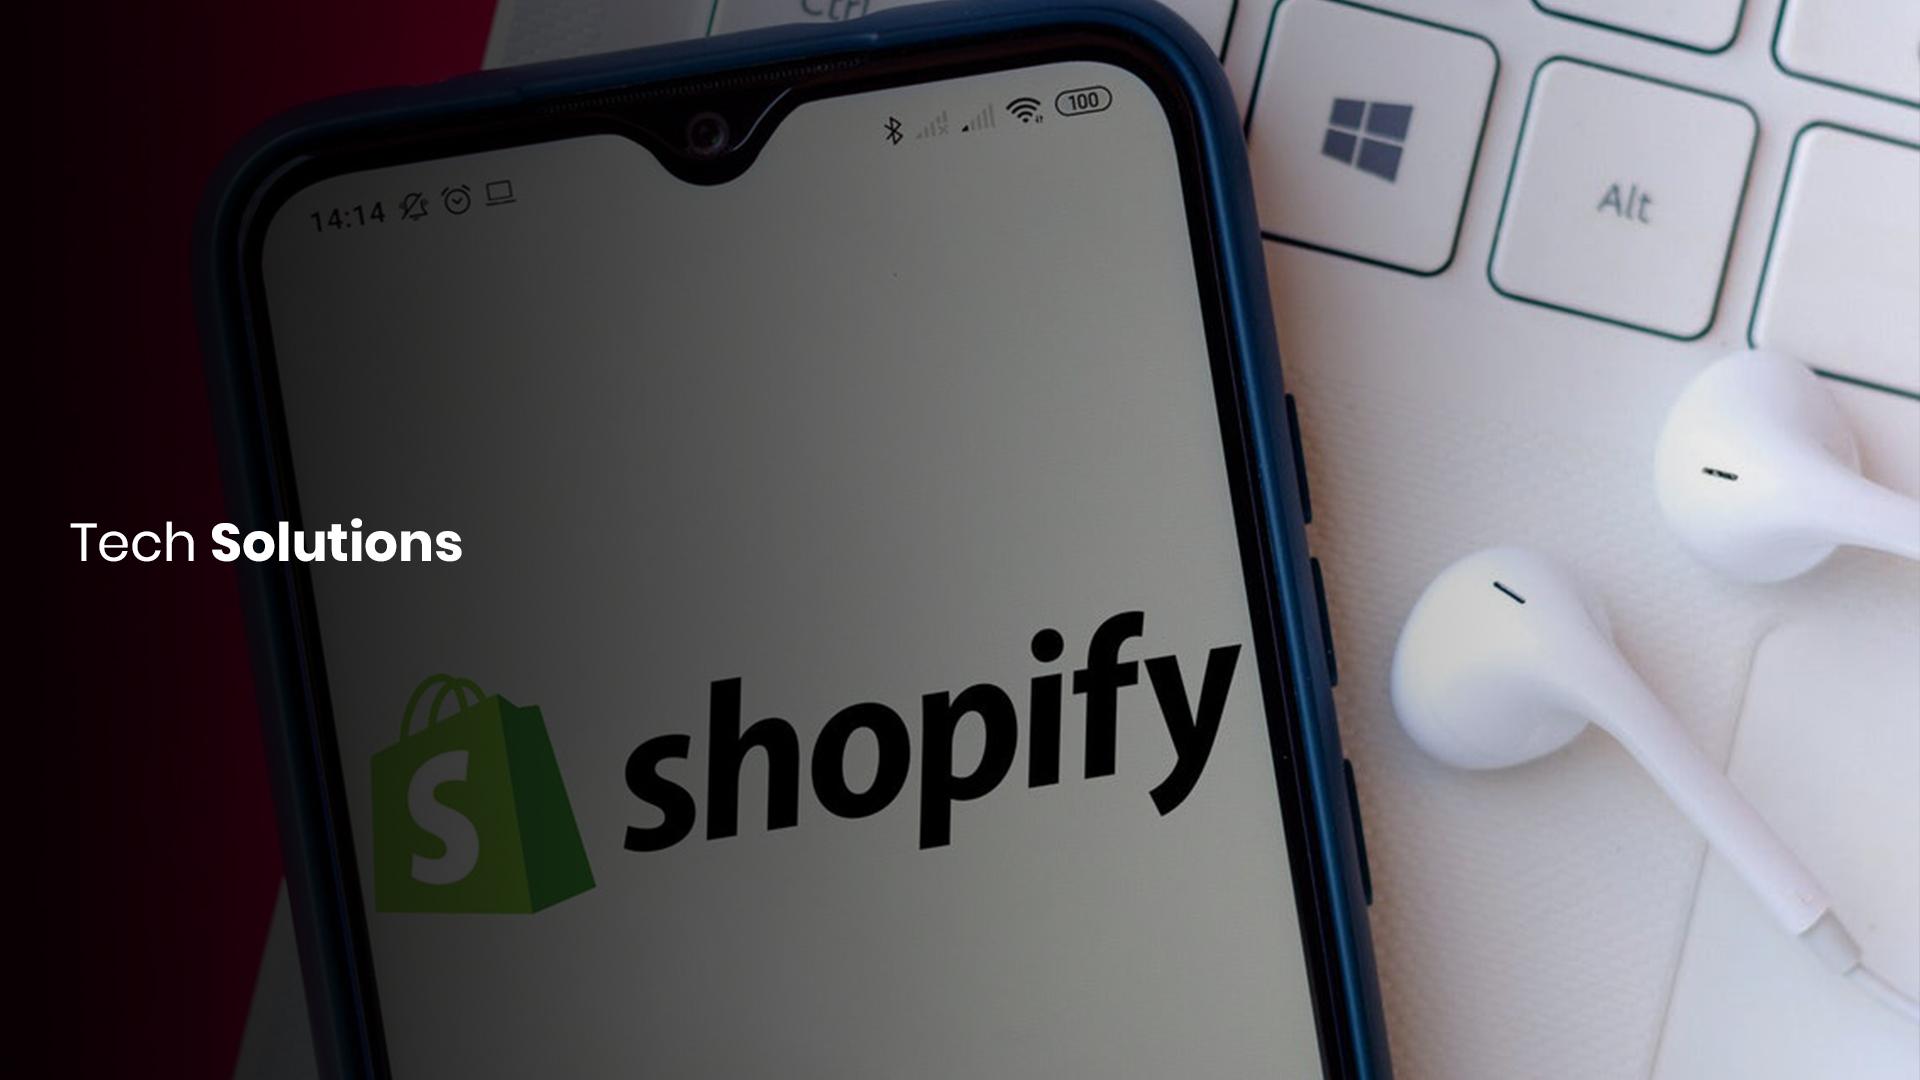 Shopify Offers Tech Solutions